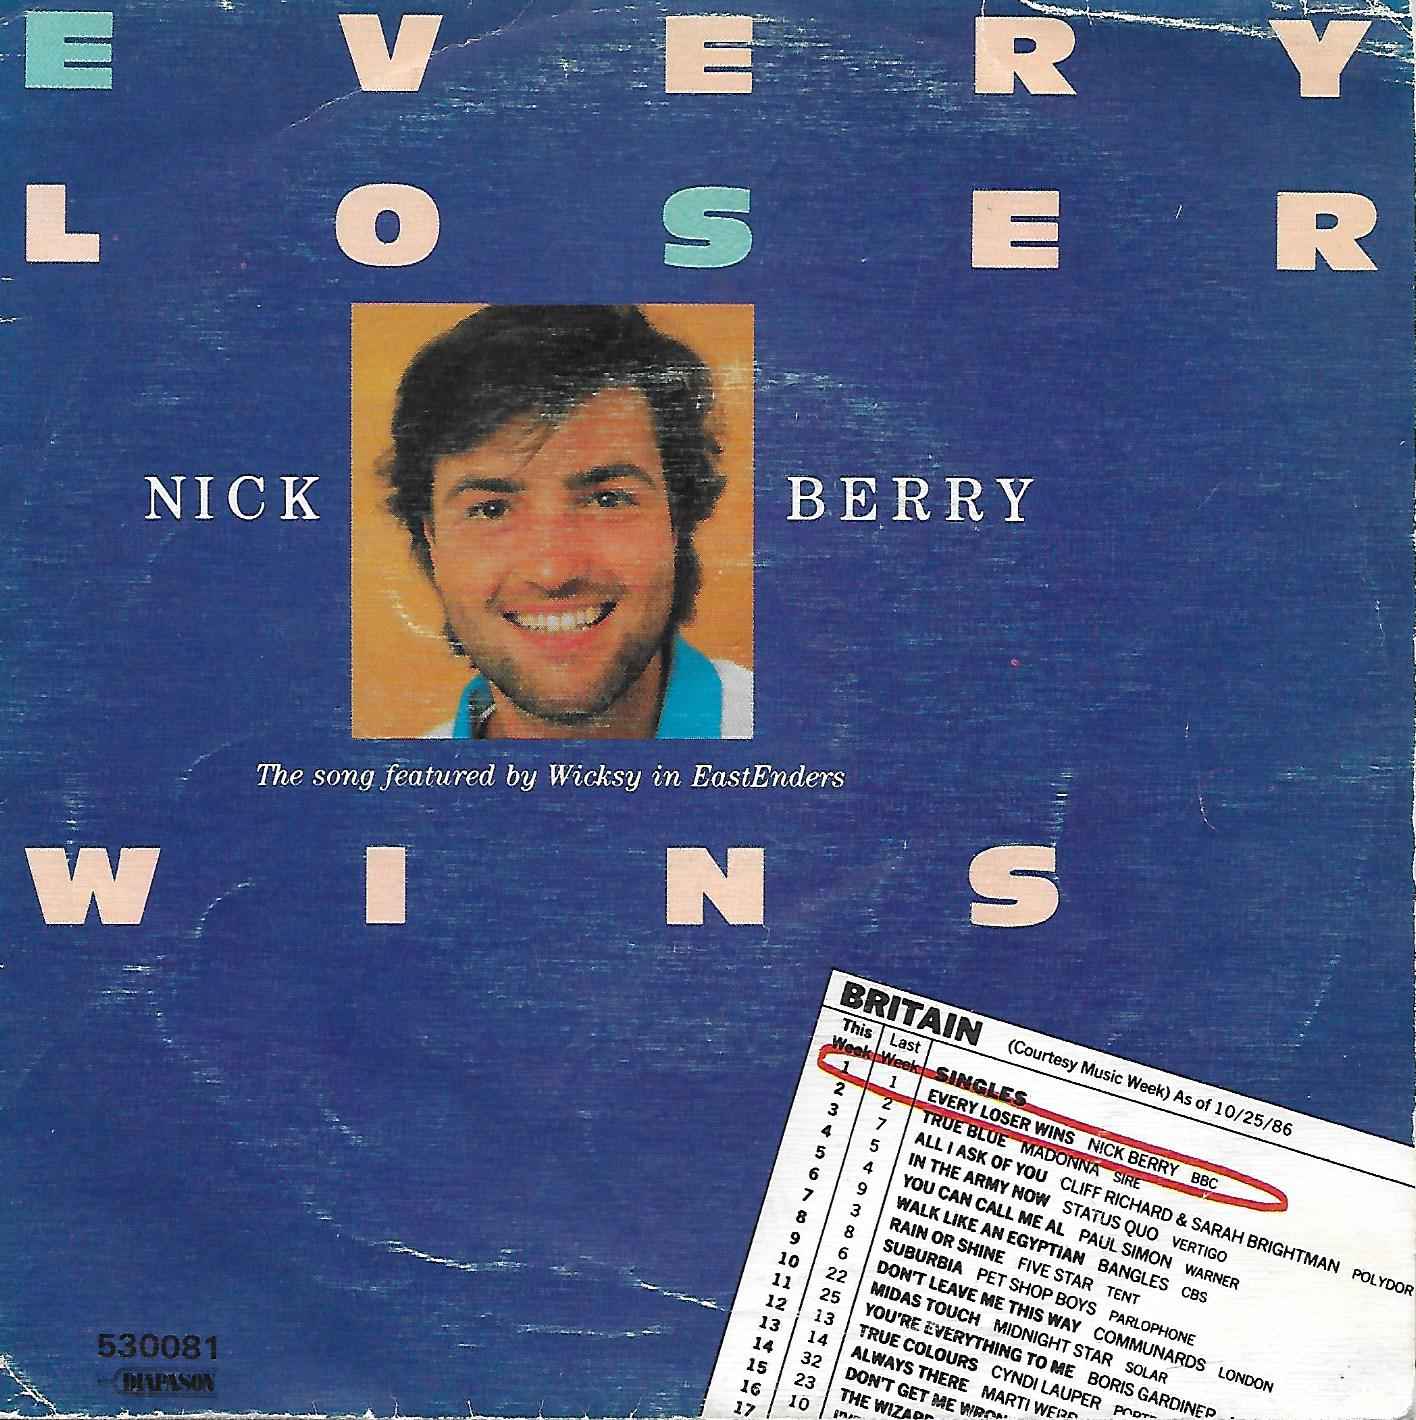 Picture of 53.0081 Every loser wins by artist Nick Berry from the BBC records and Tapes library